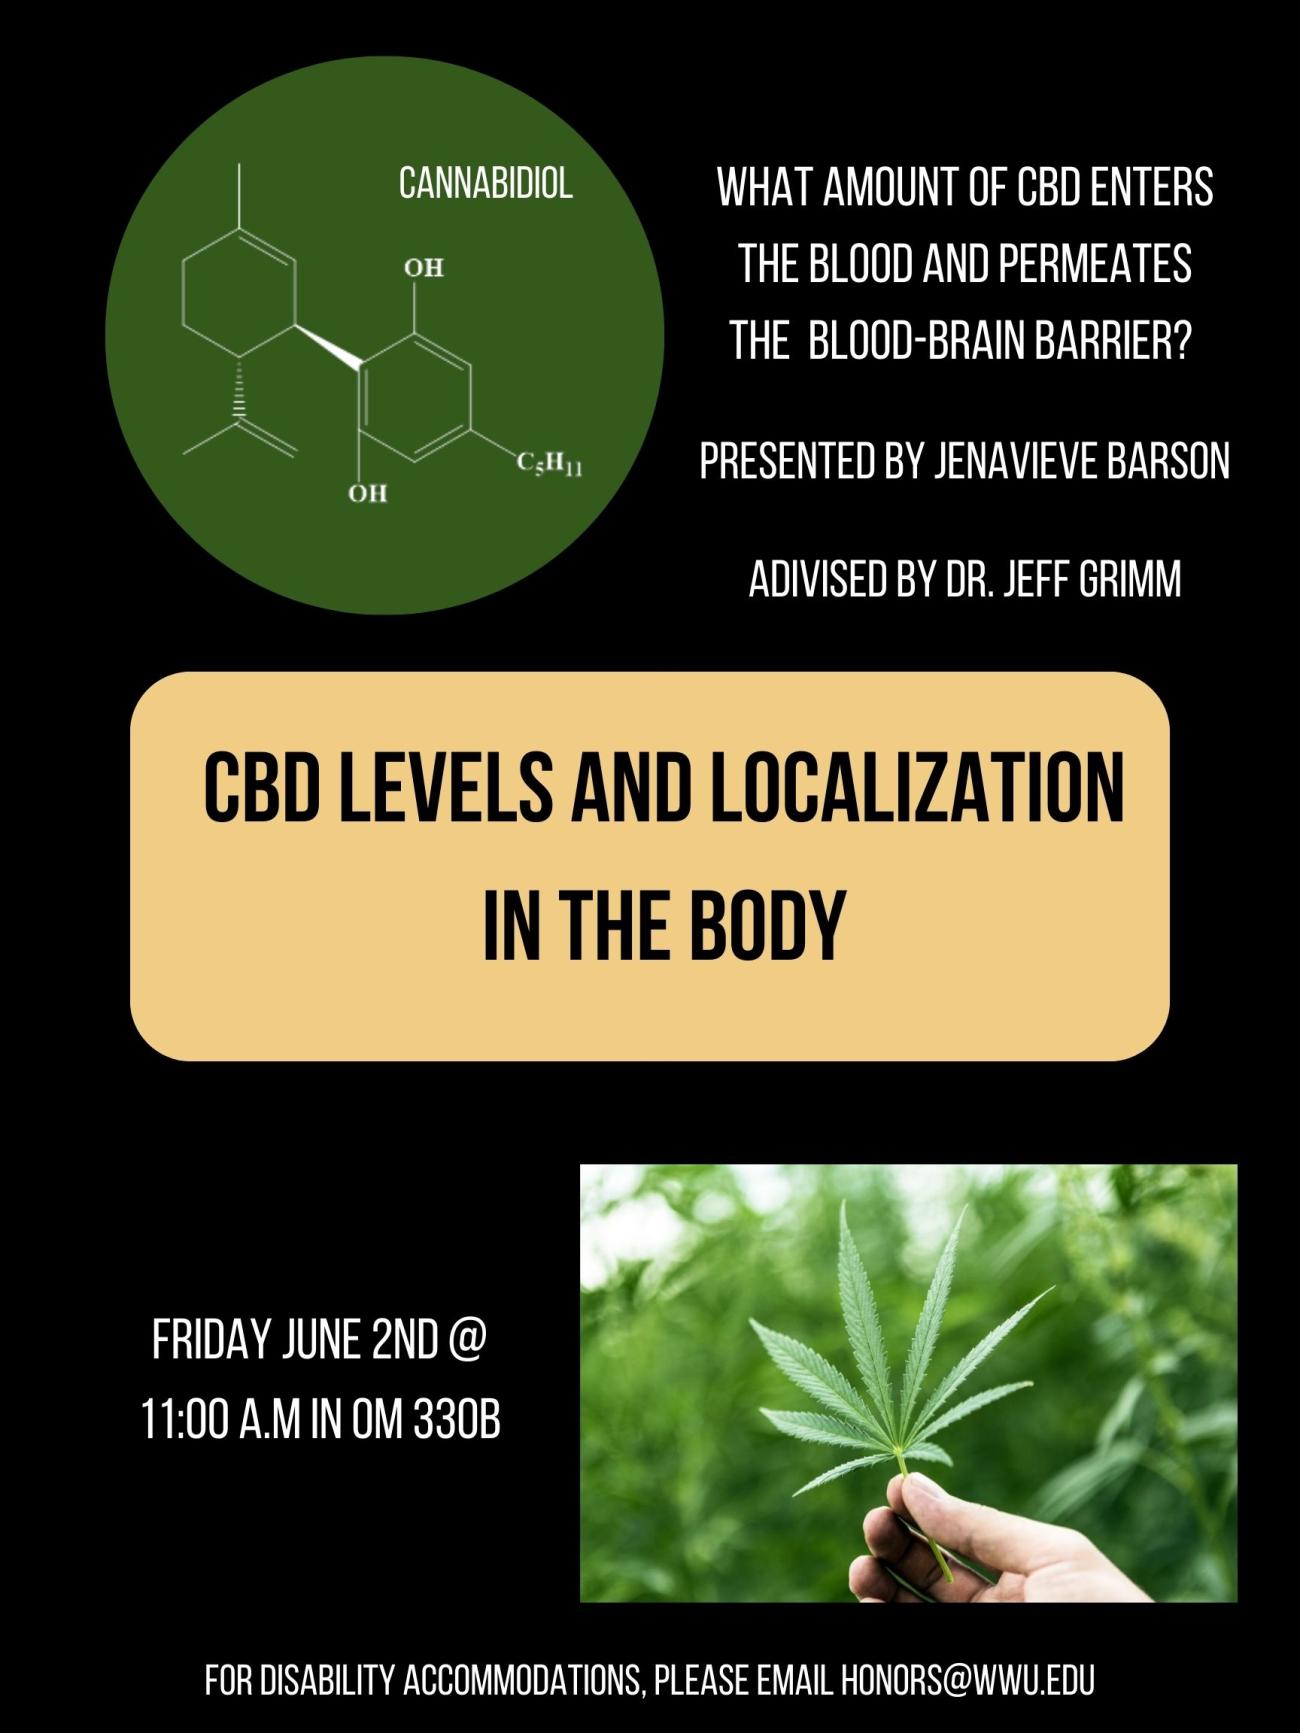 A black poster with the labeled chemical makeup of cannabidiol, a marijuana leaf, and a text box in the middle. Text reads: "What amount of CBD enters the blood and permeates the blood-brain barrier? Presented by Jenavieve Barson, Advised by Dr. Jeff Grimm. CBD Levels and Localization in the Body. Friday June 2nd @ 11:00 A.M in OM 330B. For disability accommodations, please email honors@wwu.edu."